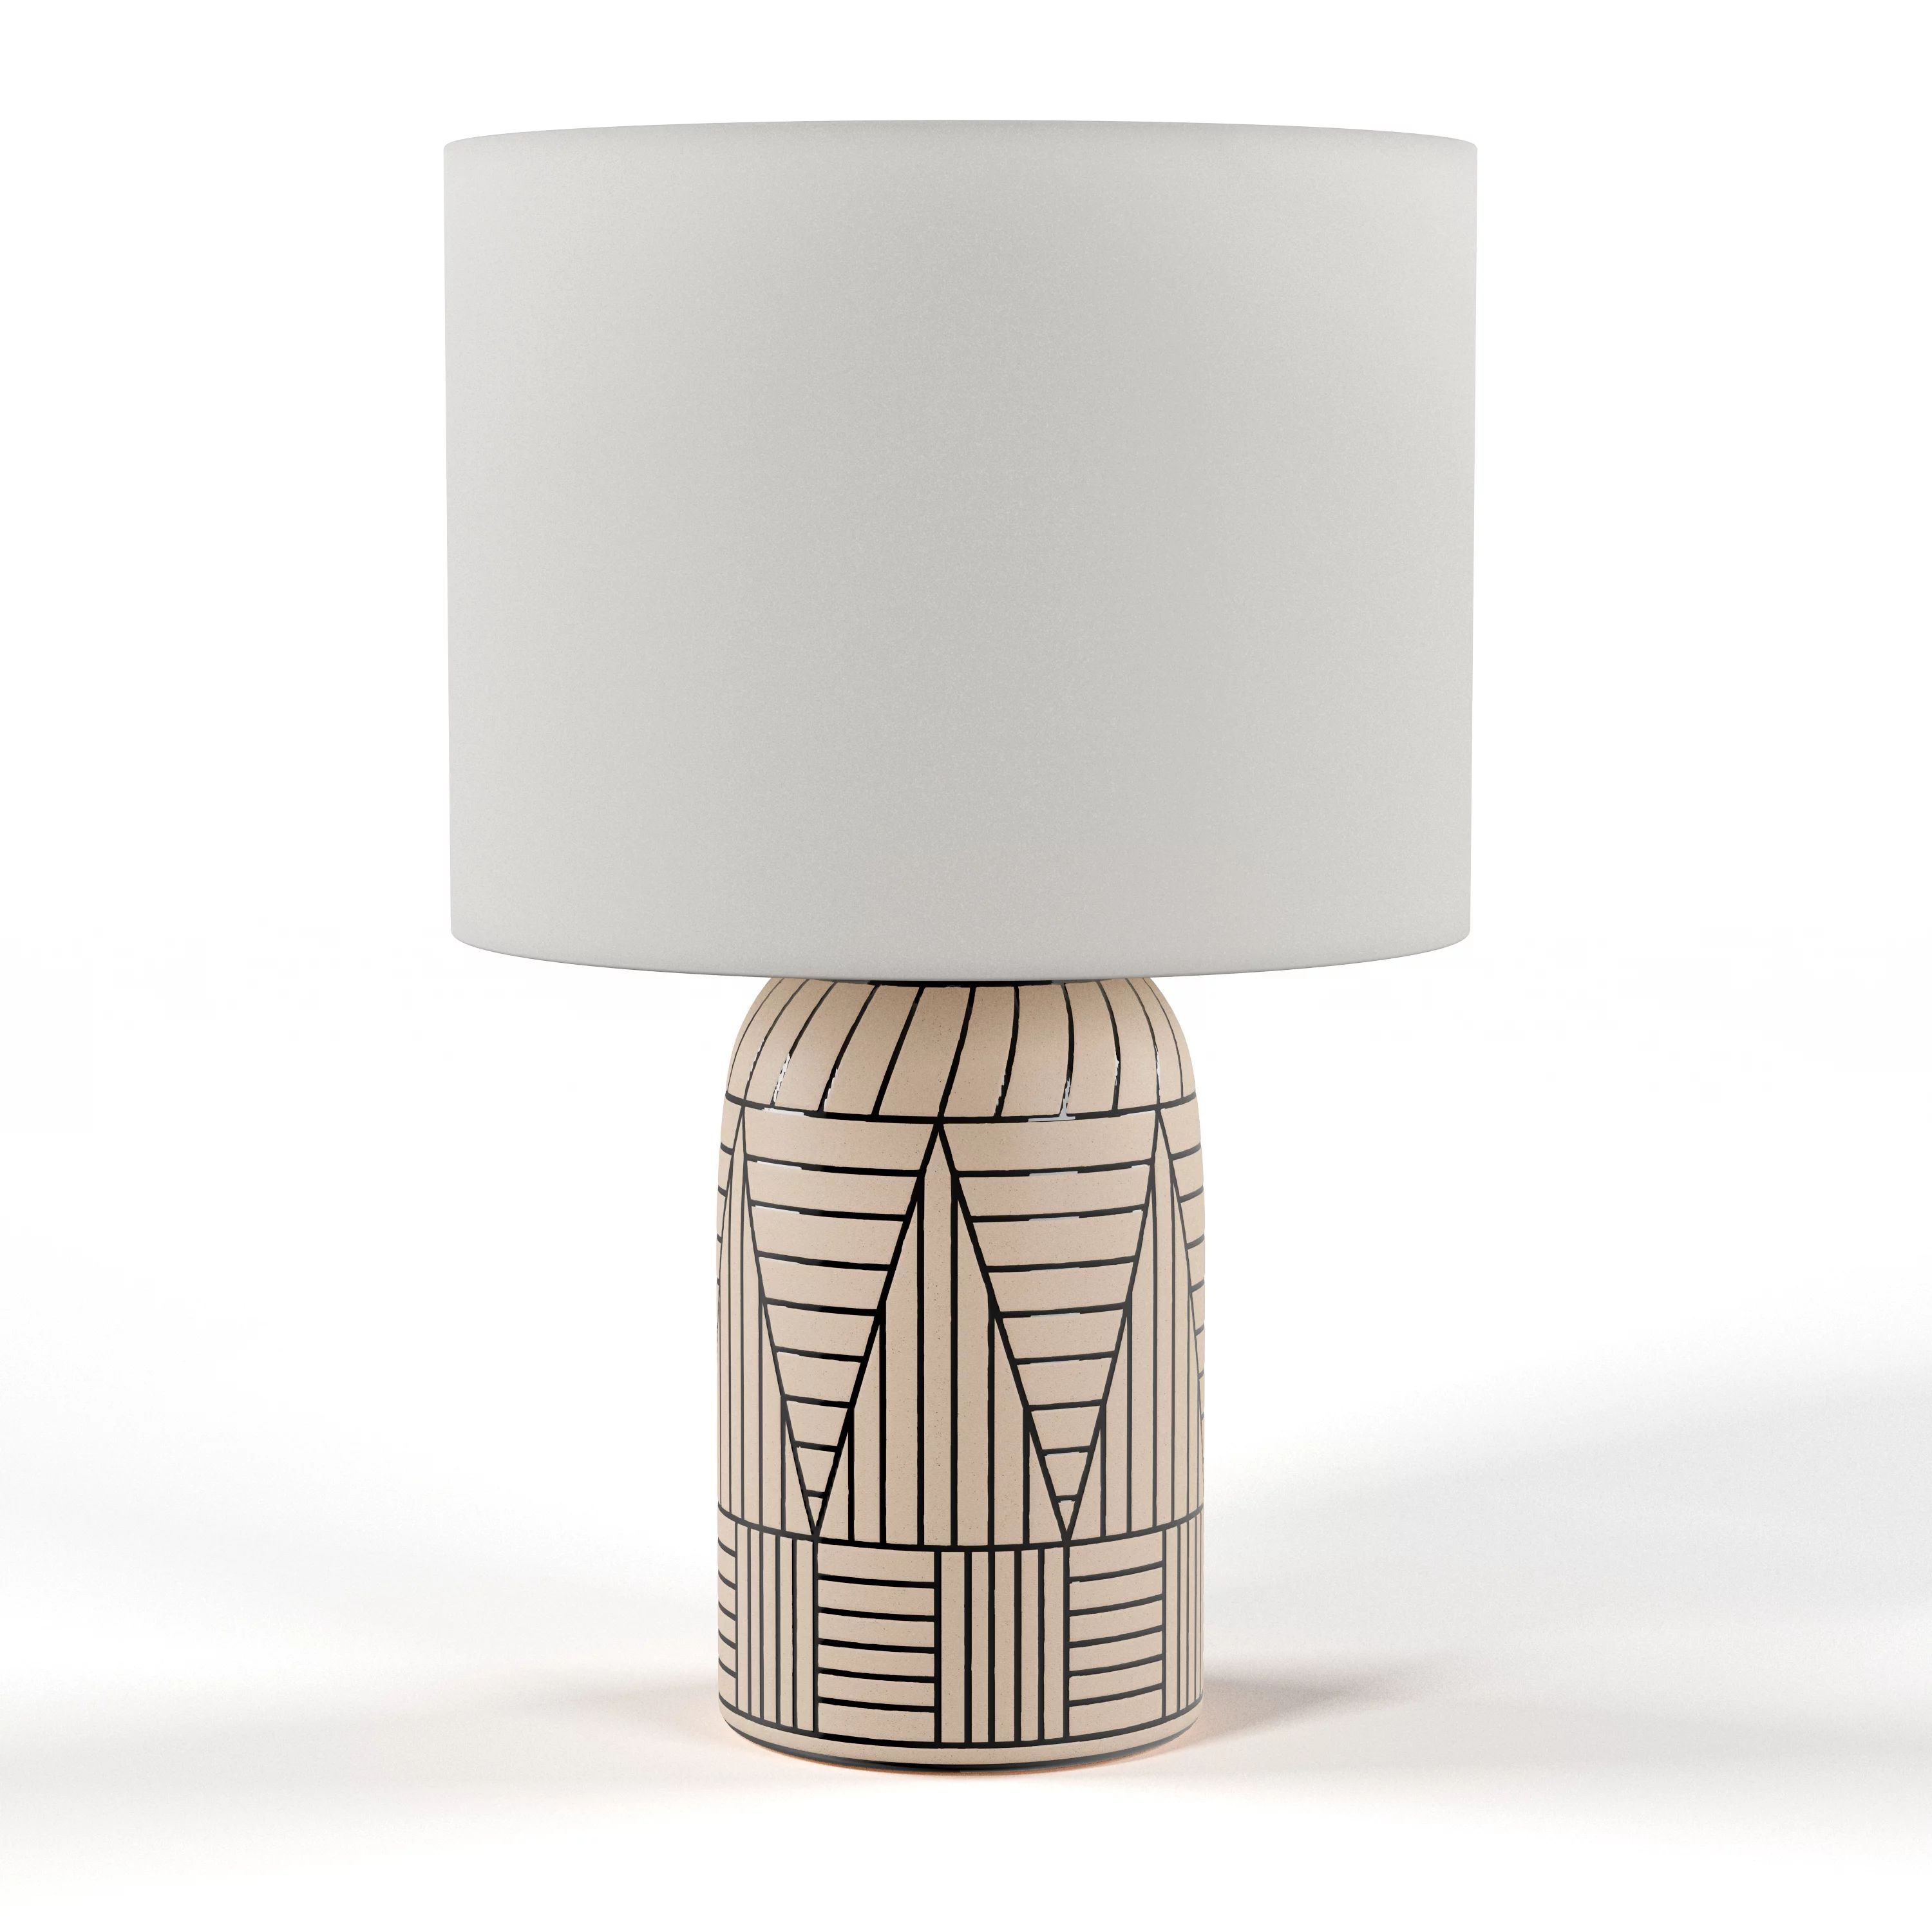 Modrn Ceramic Table Lamp with Pattern-Black Accent-Bulb Included | Walmart (US)